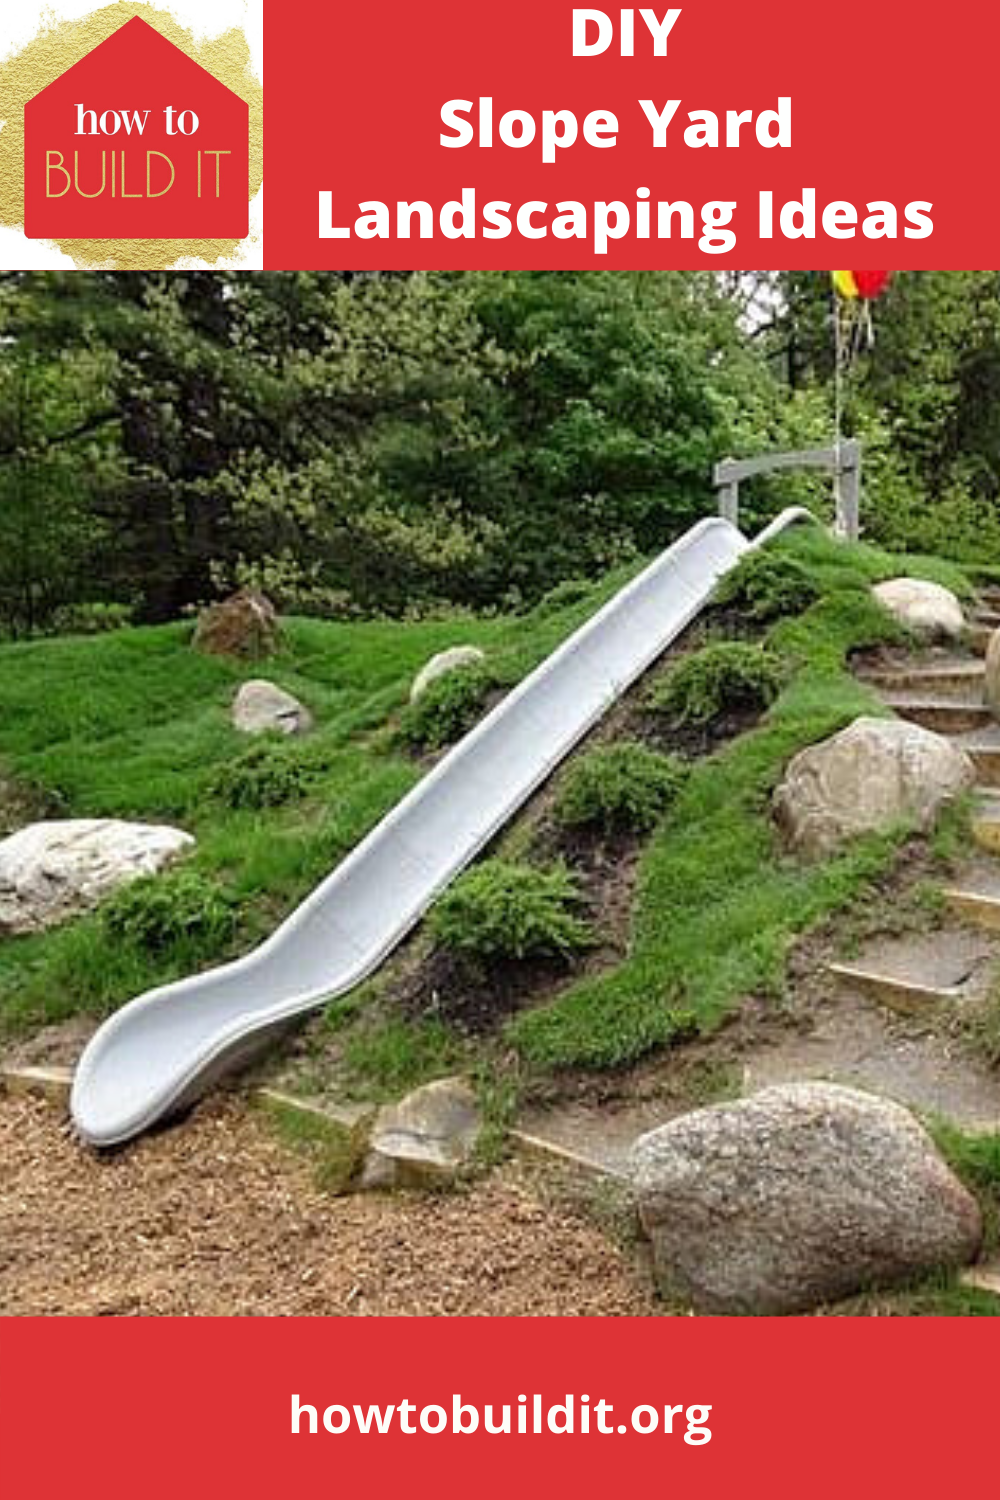 If you have a sloped yard, there are still many ways to use it other than rolling down the hill. Slope yard landscaping ideas can turn that drab hill into a fab garden, rock wall, flower garden and more. Read the post for ideas that you can DIY. #diylandscapingideas #howtobuilditblog #slopeyardlandsacpingideas